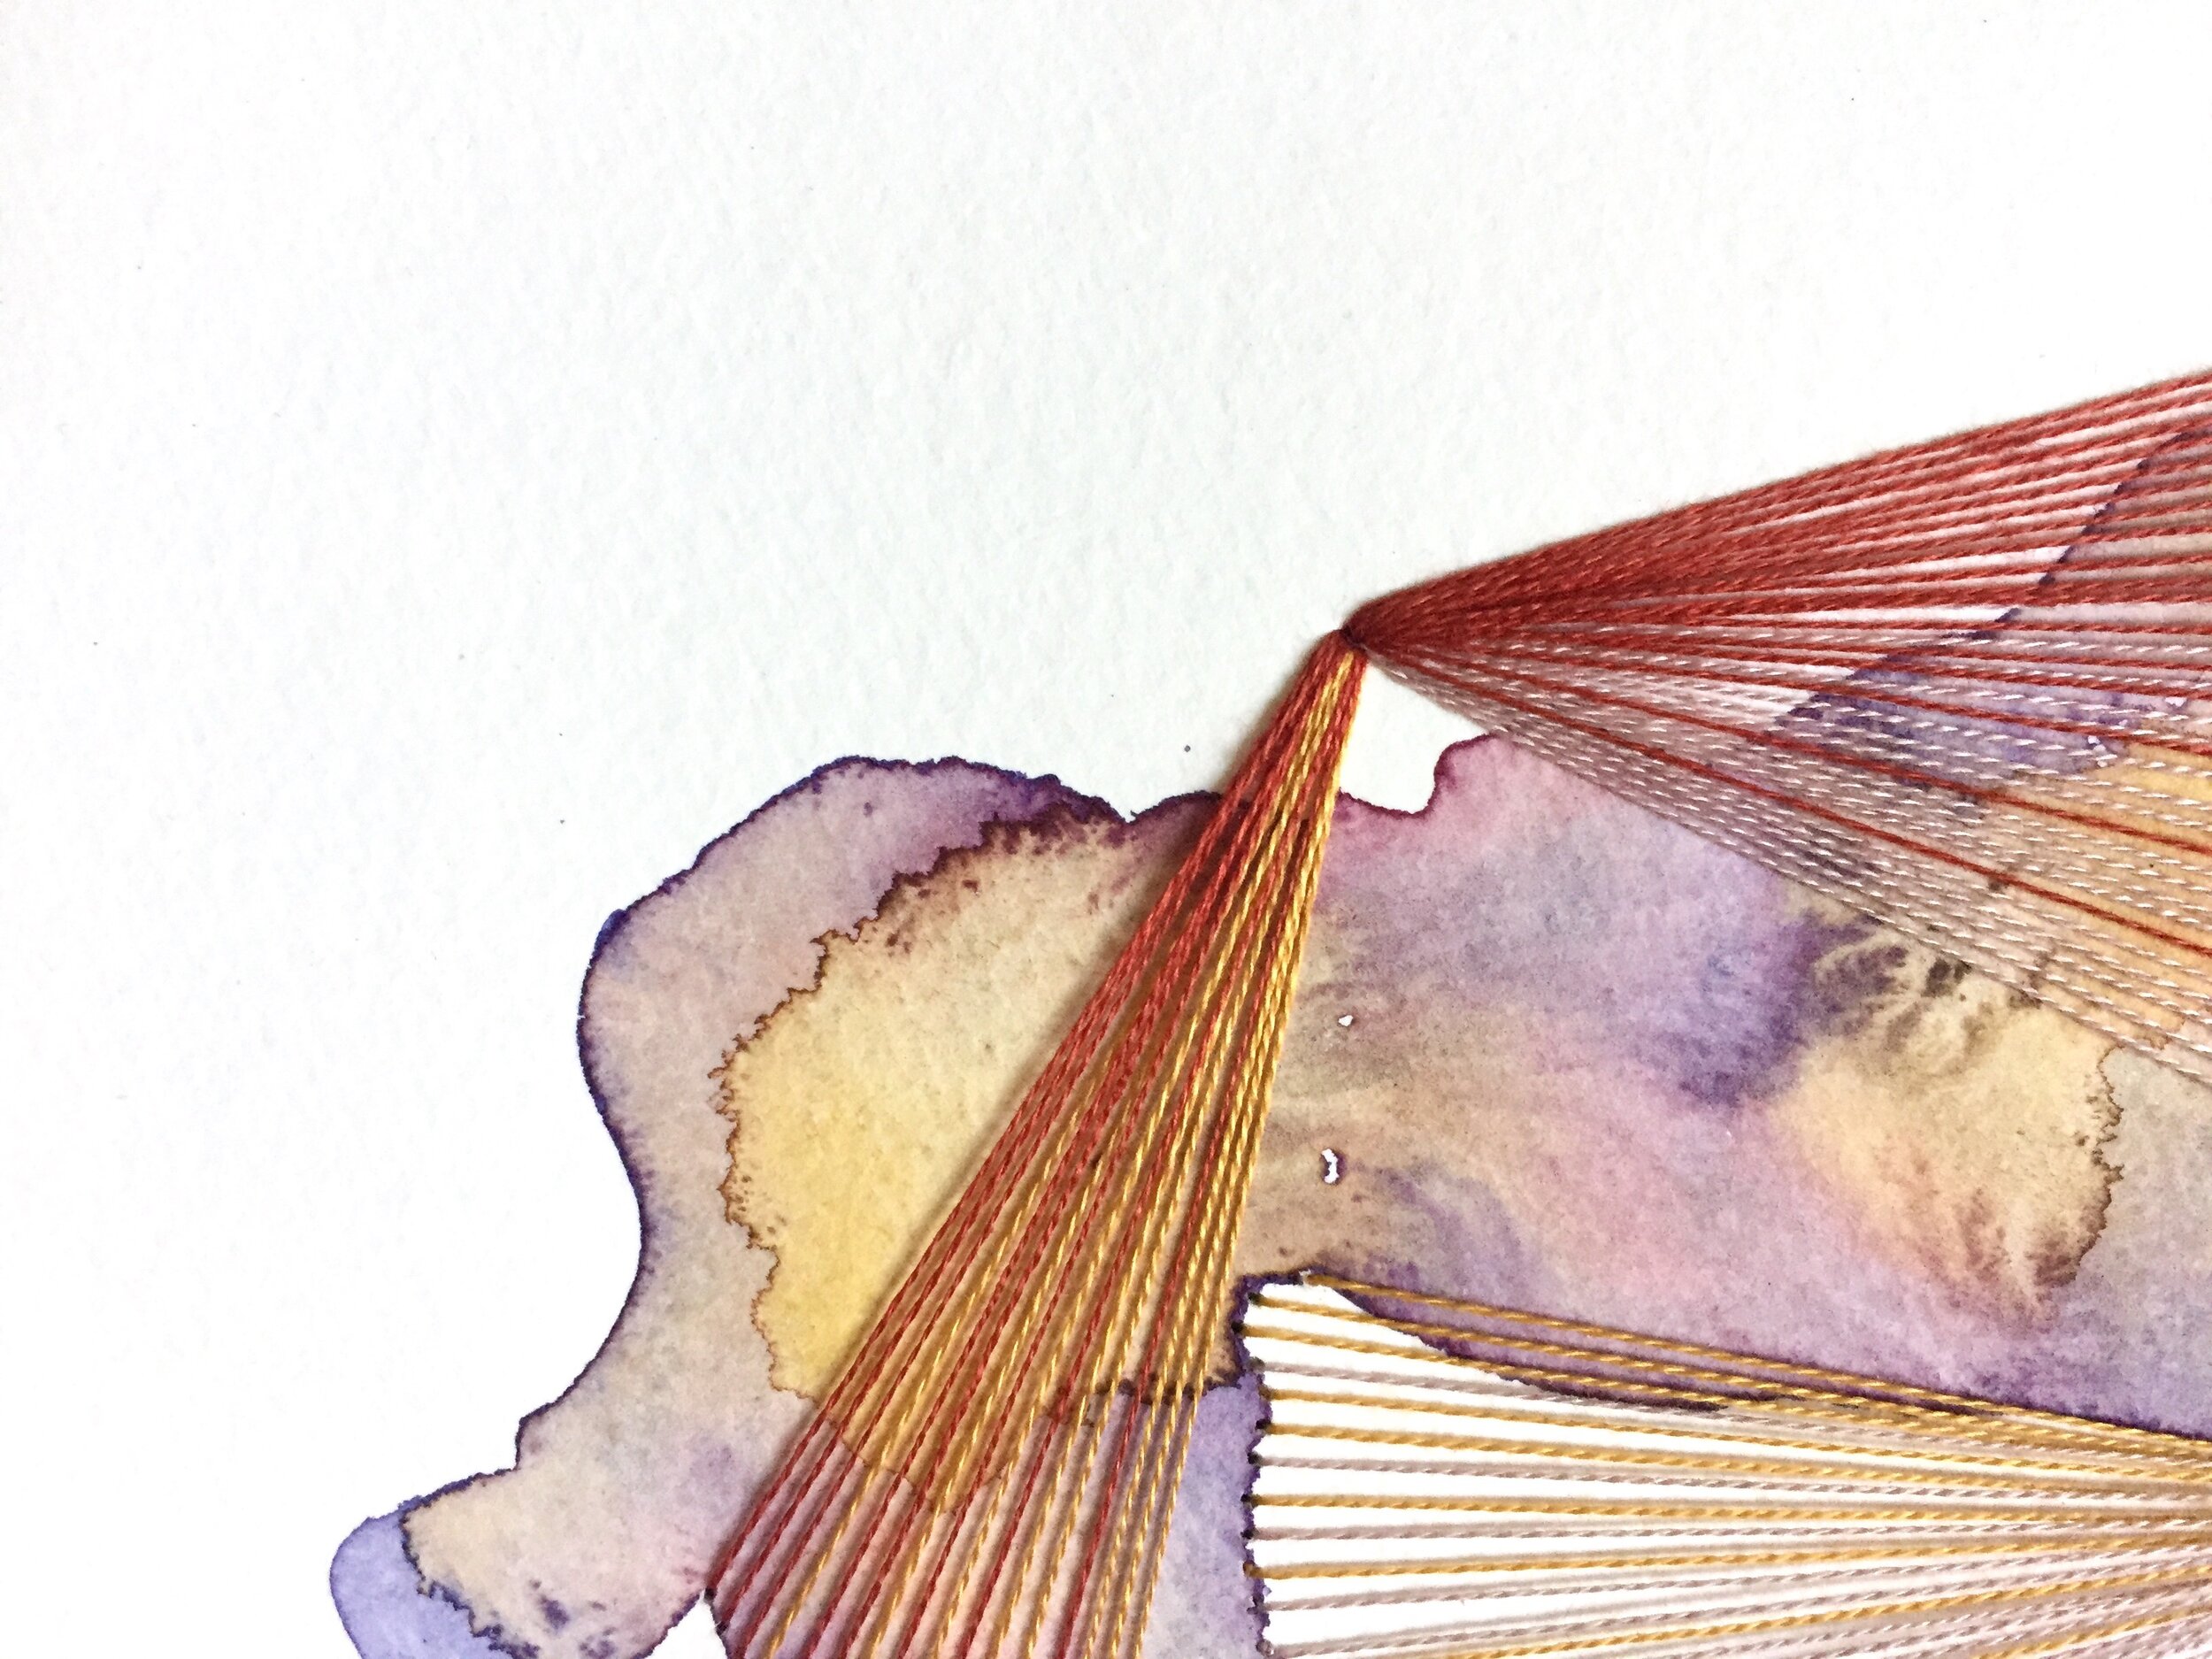 Watercolor and Embroidery in Violet, Brick, and Gold--detail 1